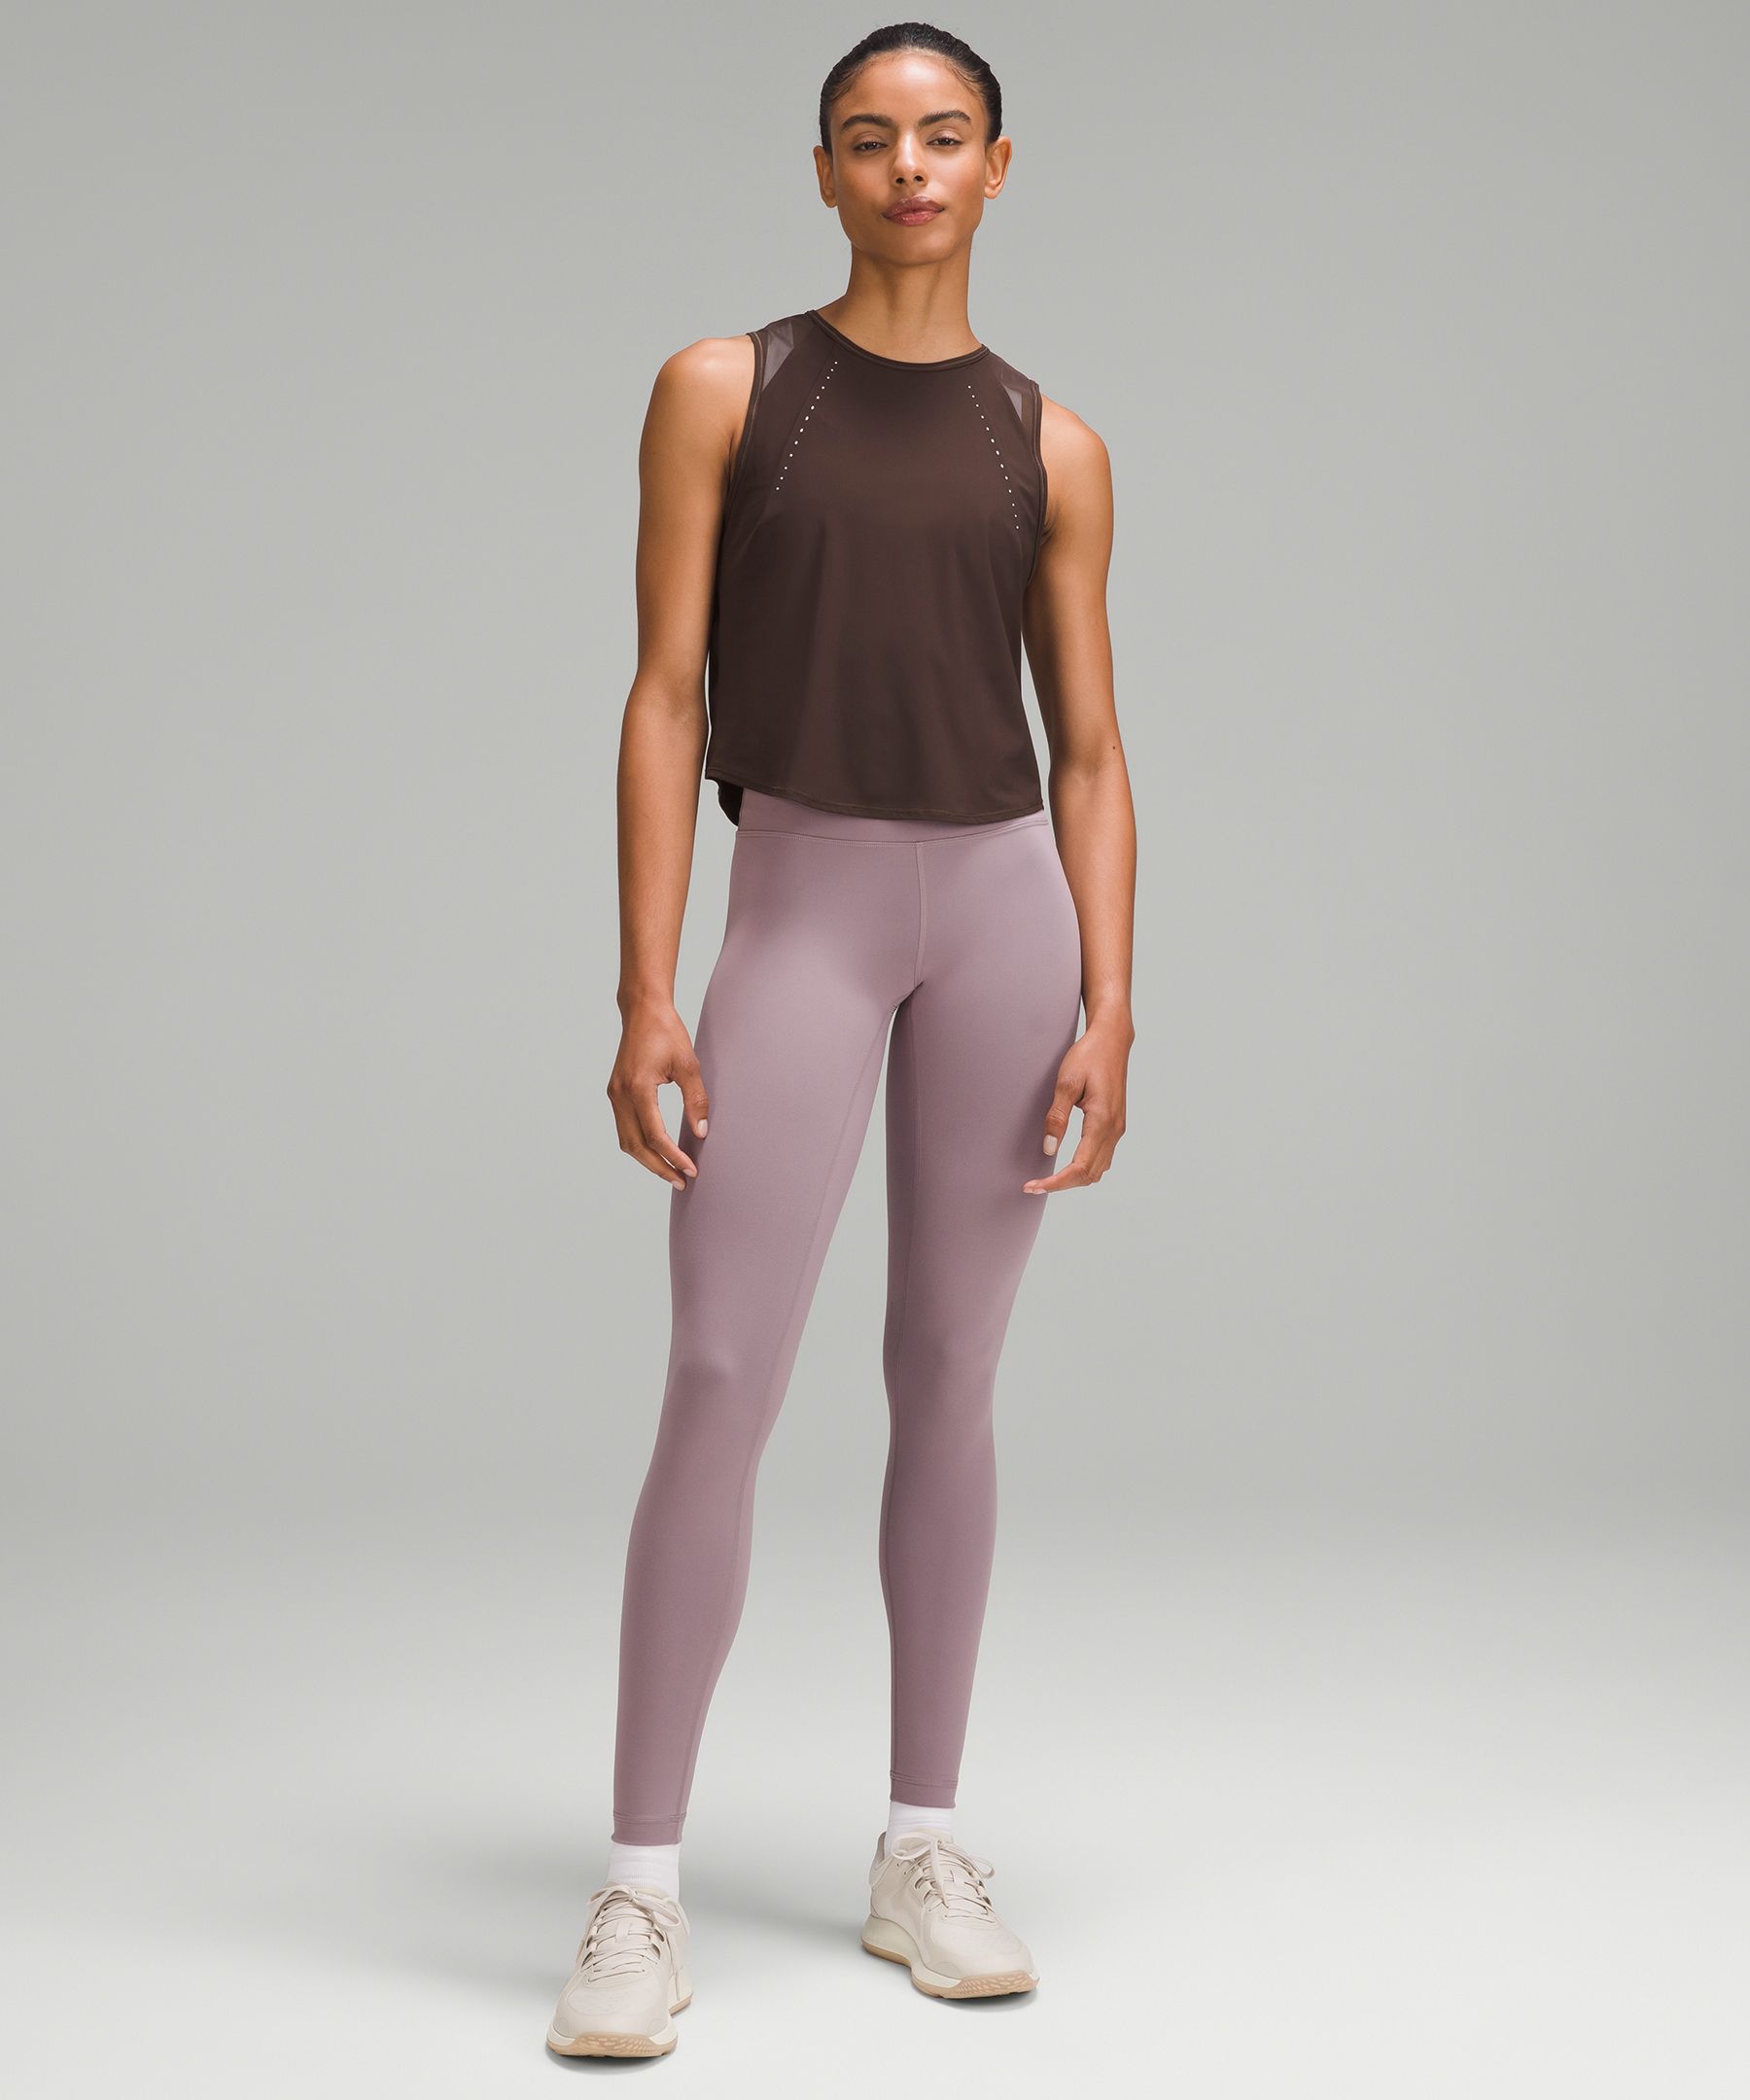 Sizing Advice for the Sculpt Cropped Tank Top : r/lululemon